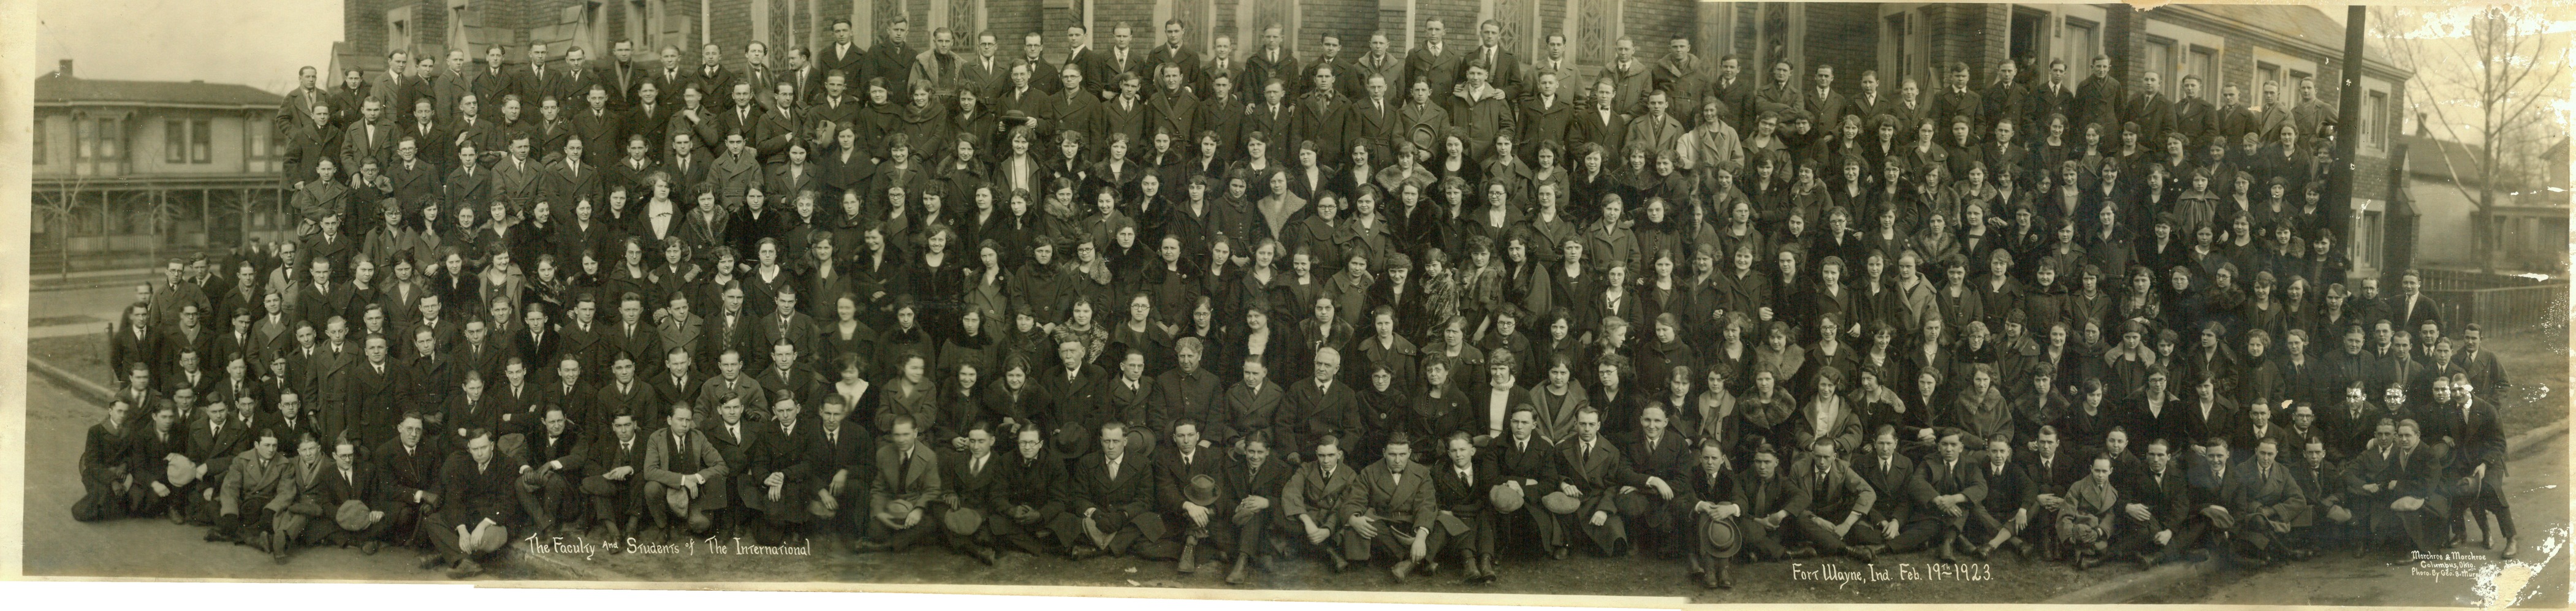 February 19, 1923 International Business College faculty and students